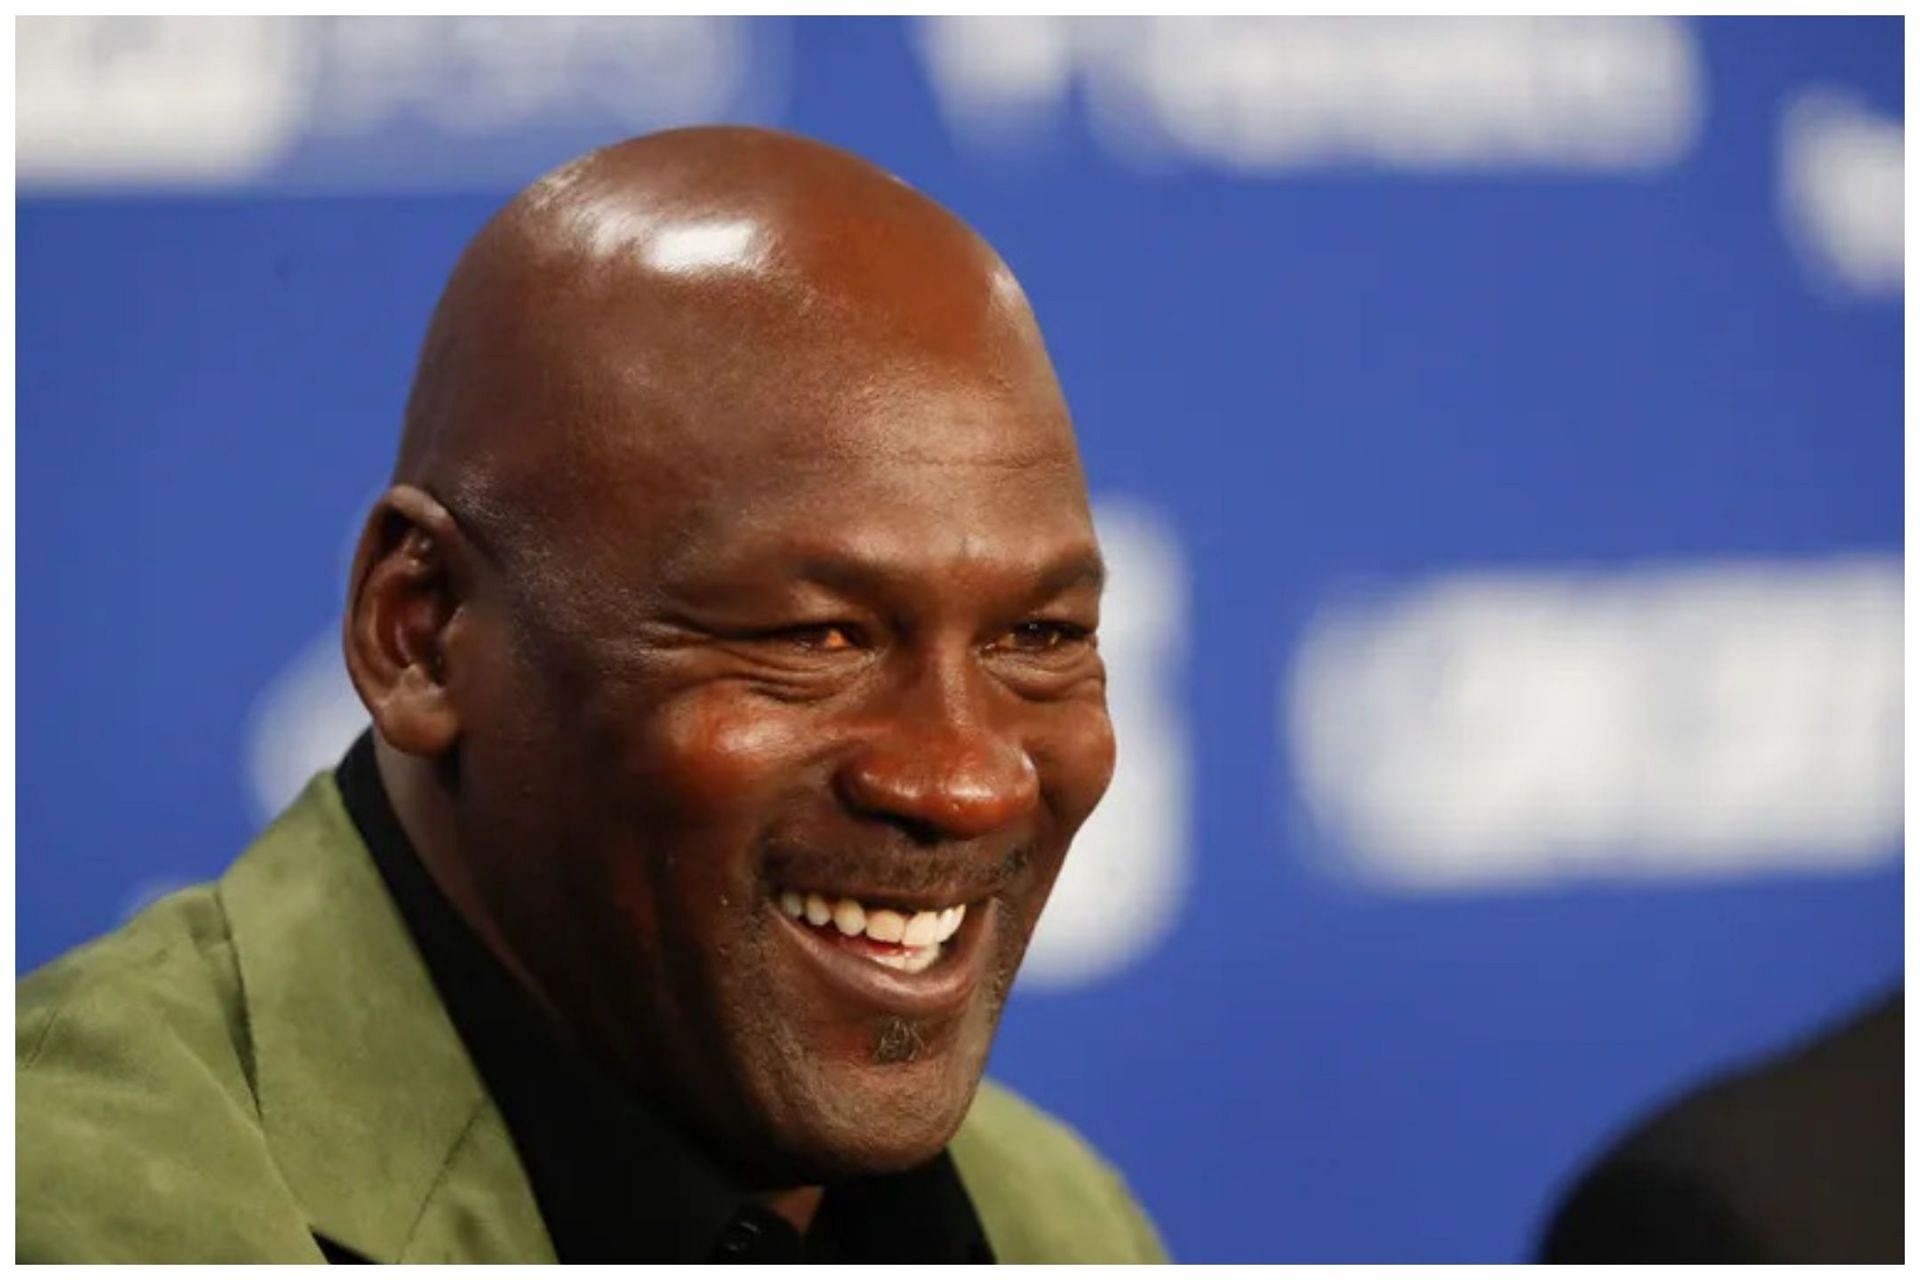 Michael Jordan had an unsuccessful deal with a watch company back in 1983 (AP Photo/Thibault Camus)